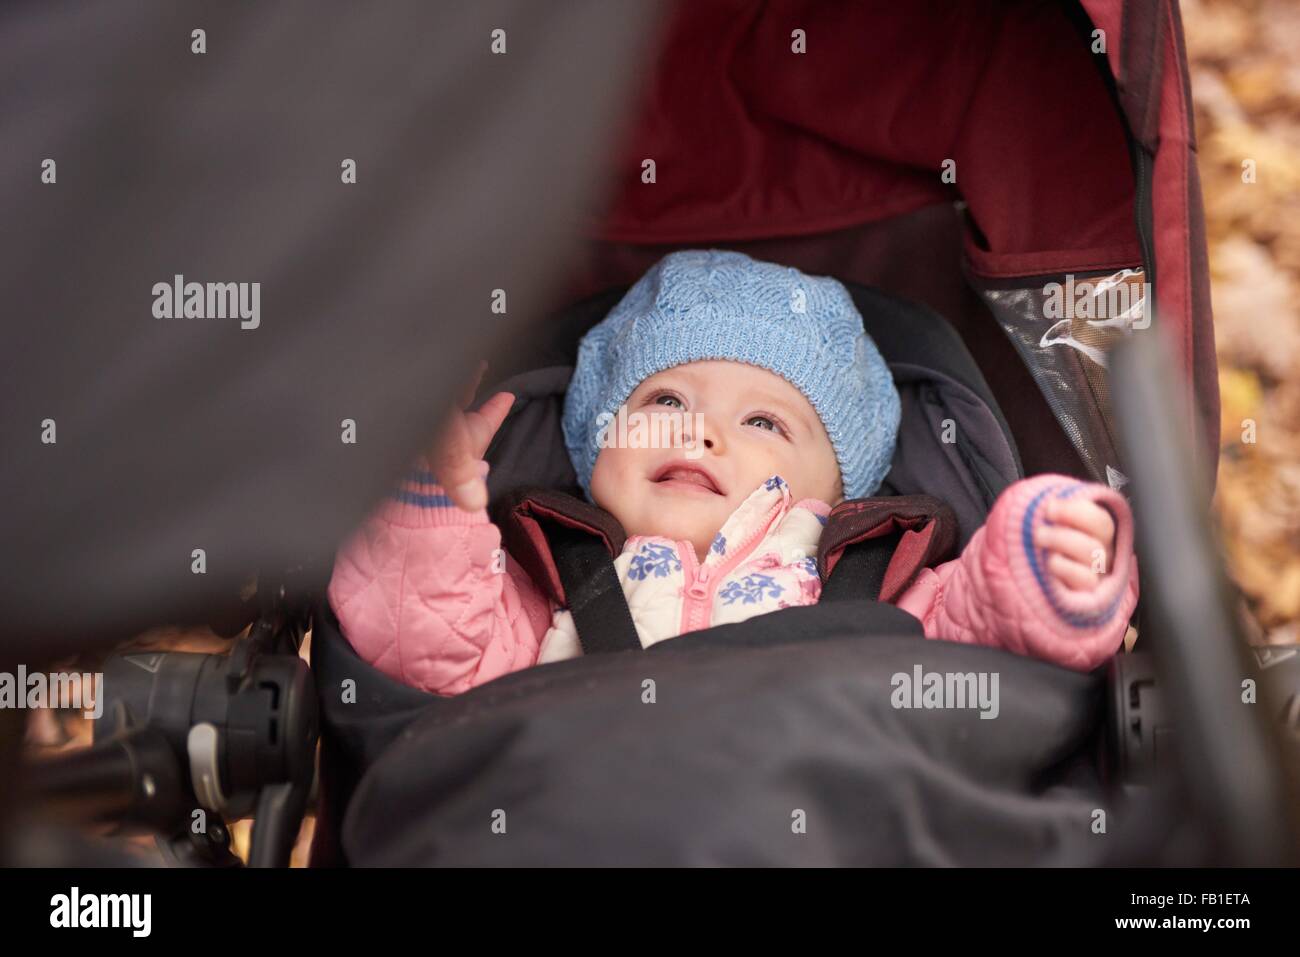 Baby Girl wearing blue hat looking up from baby carriage Banque D'Images